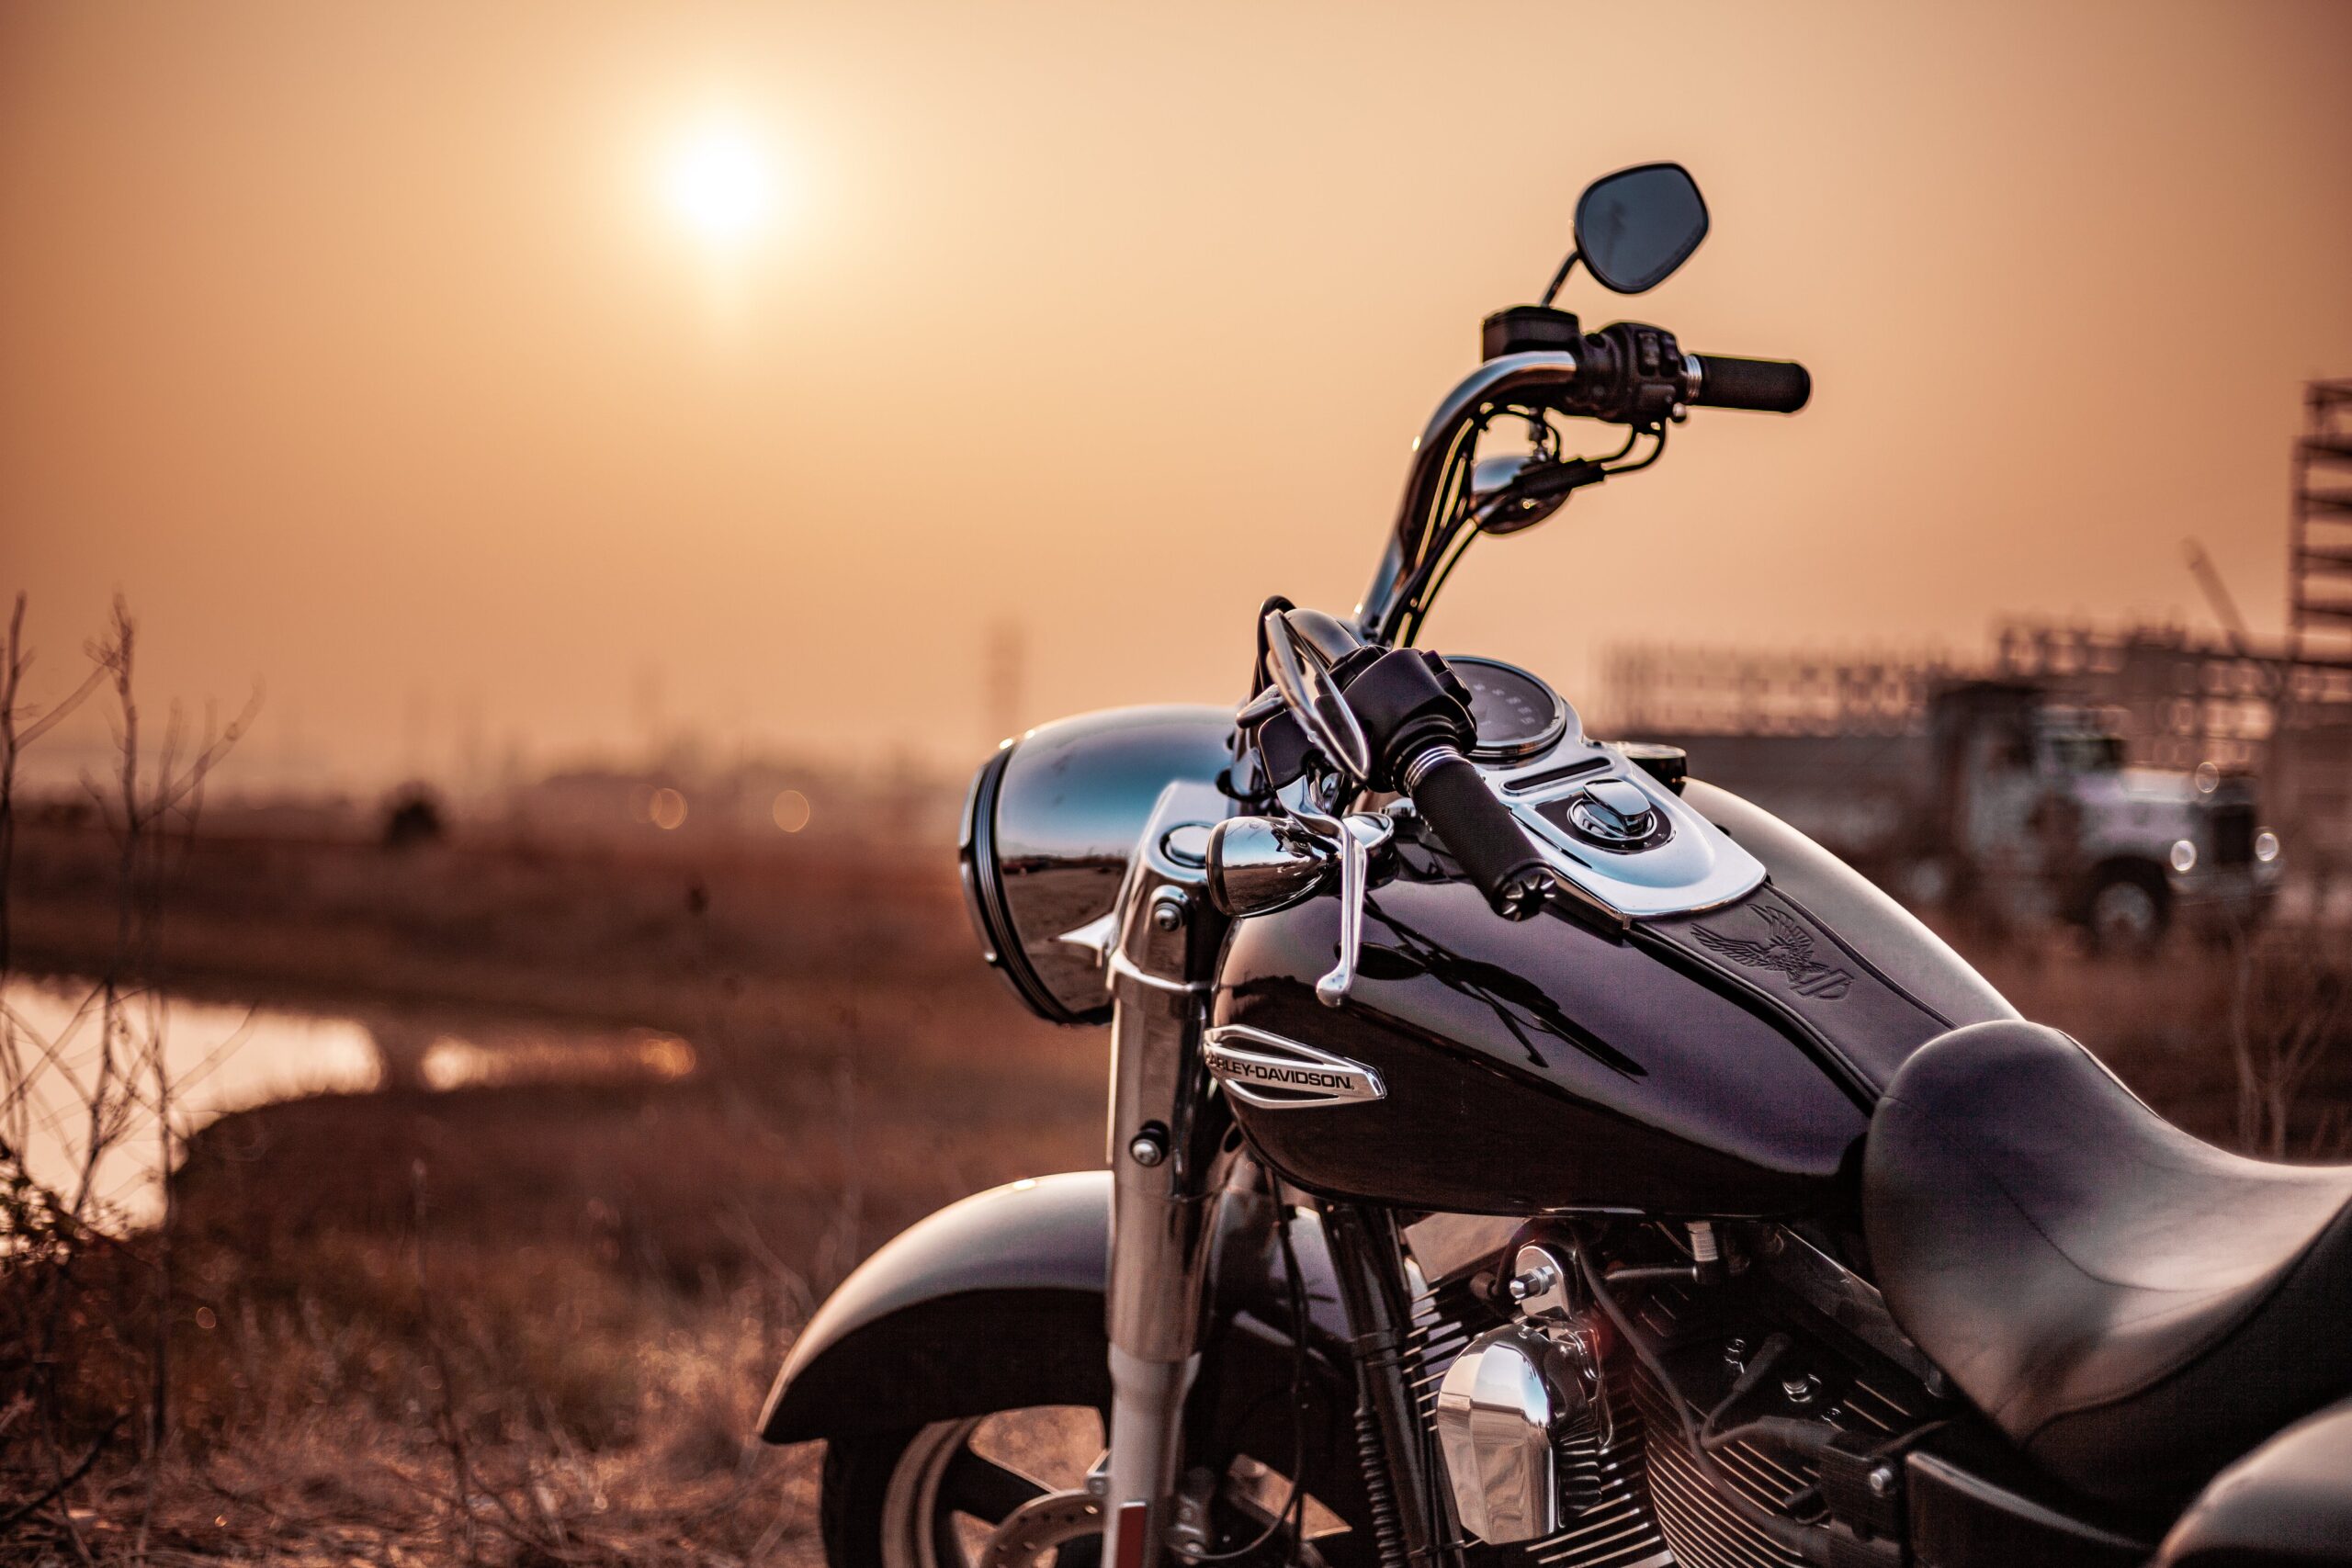 How to Prevent a Motorcycle Injury